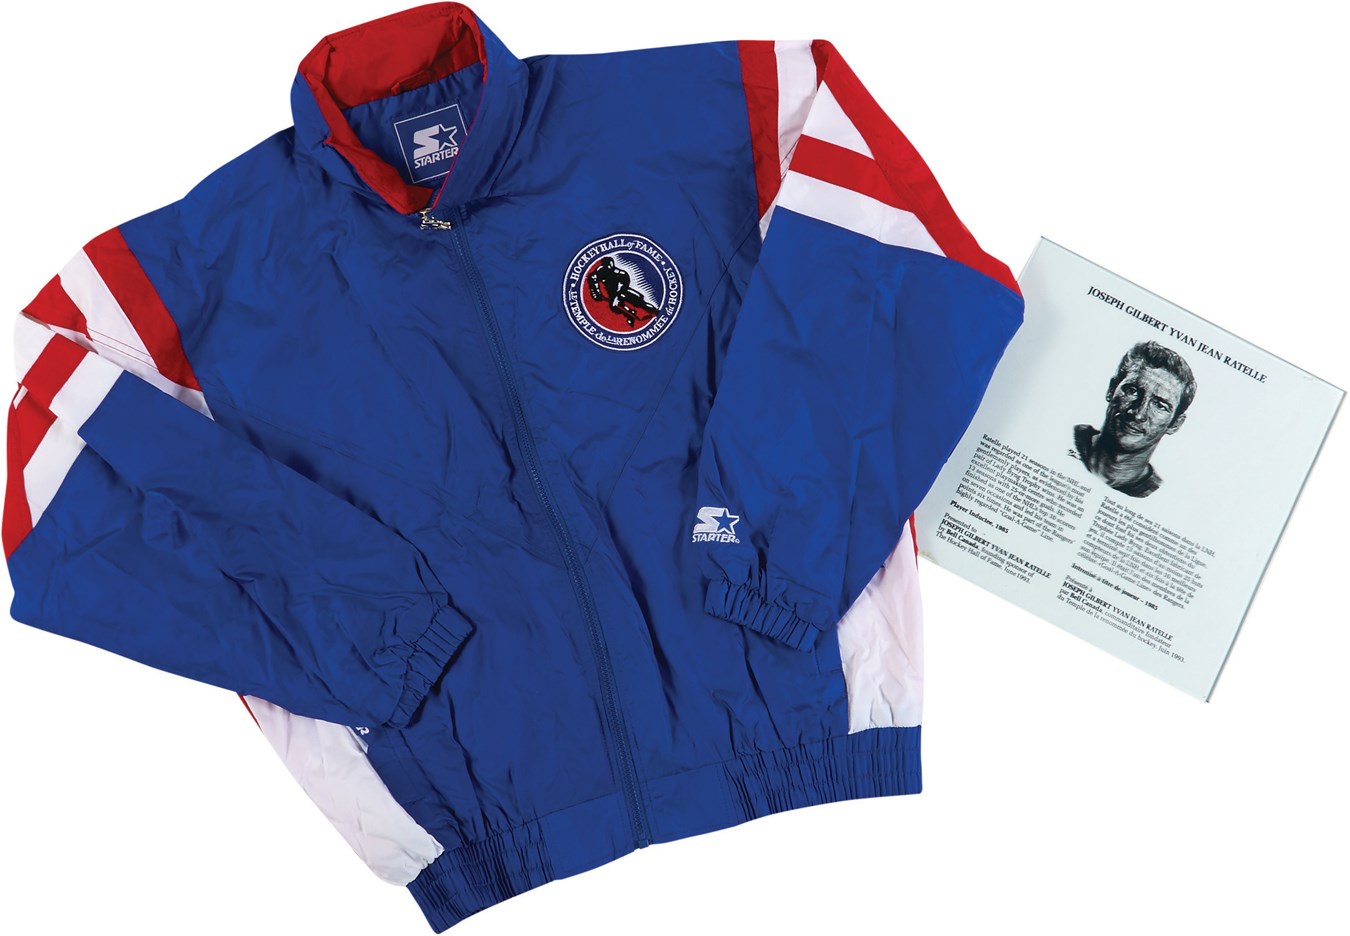 - Jean Ratelle Hockey Hall of Fame Plaque and Jacket